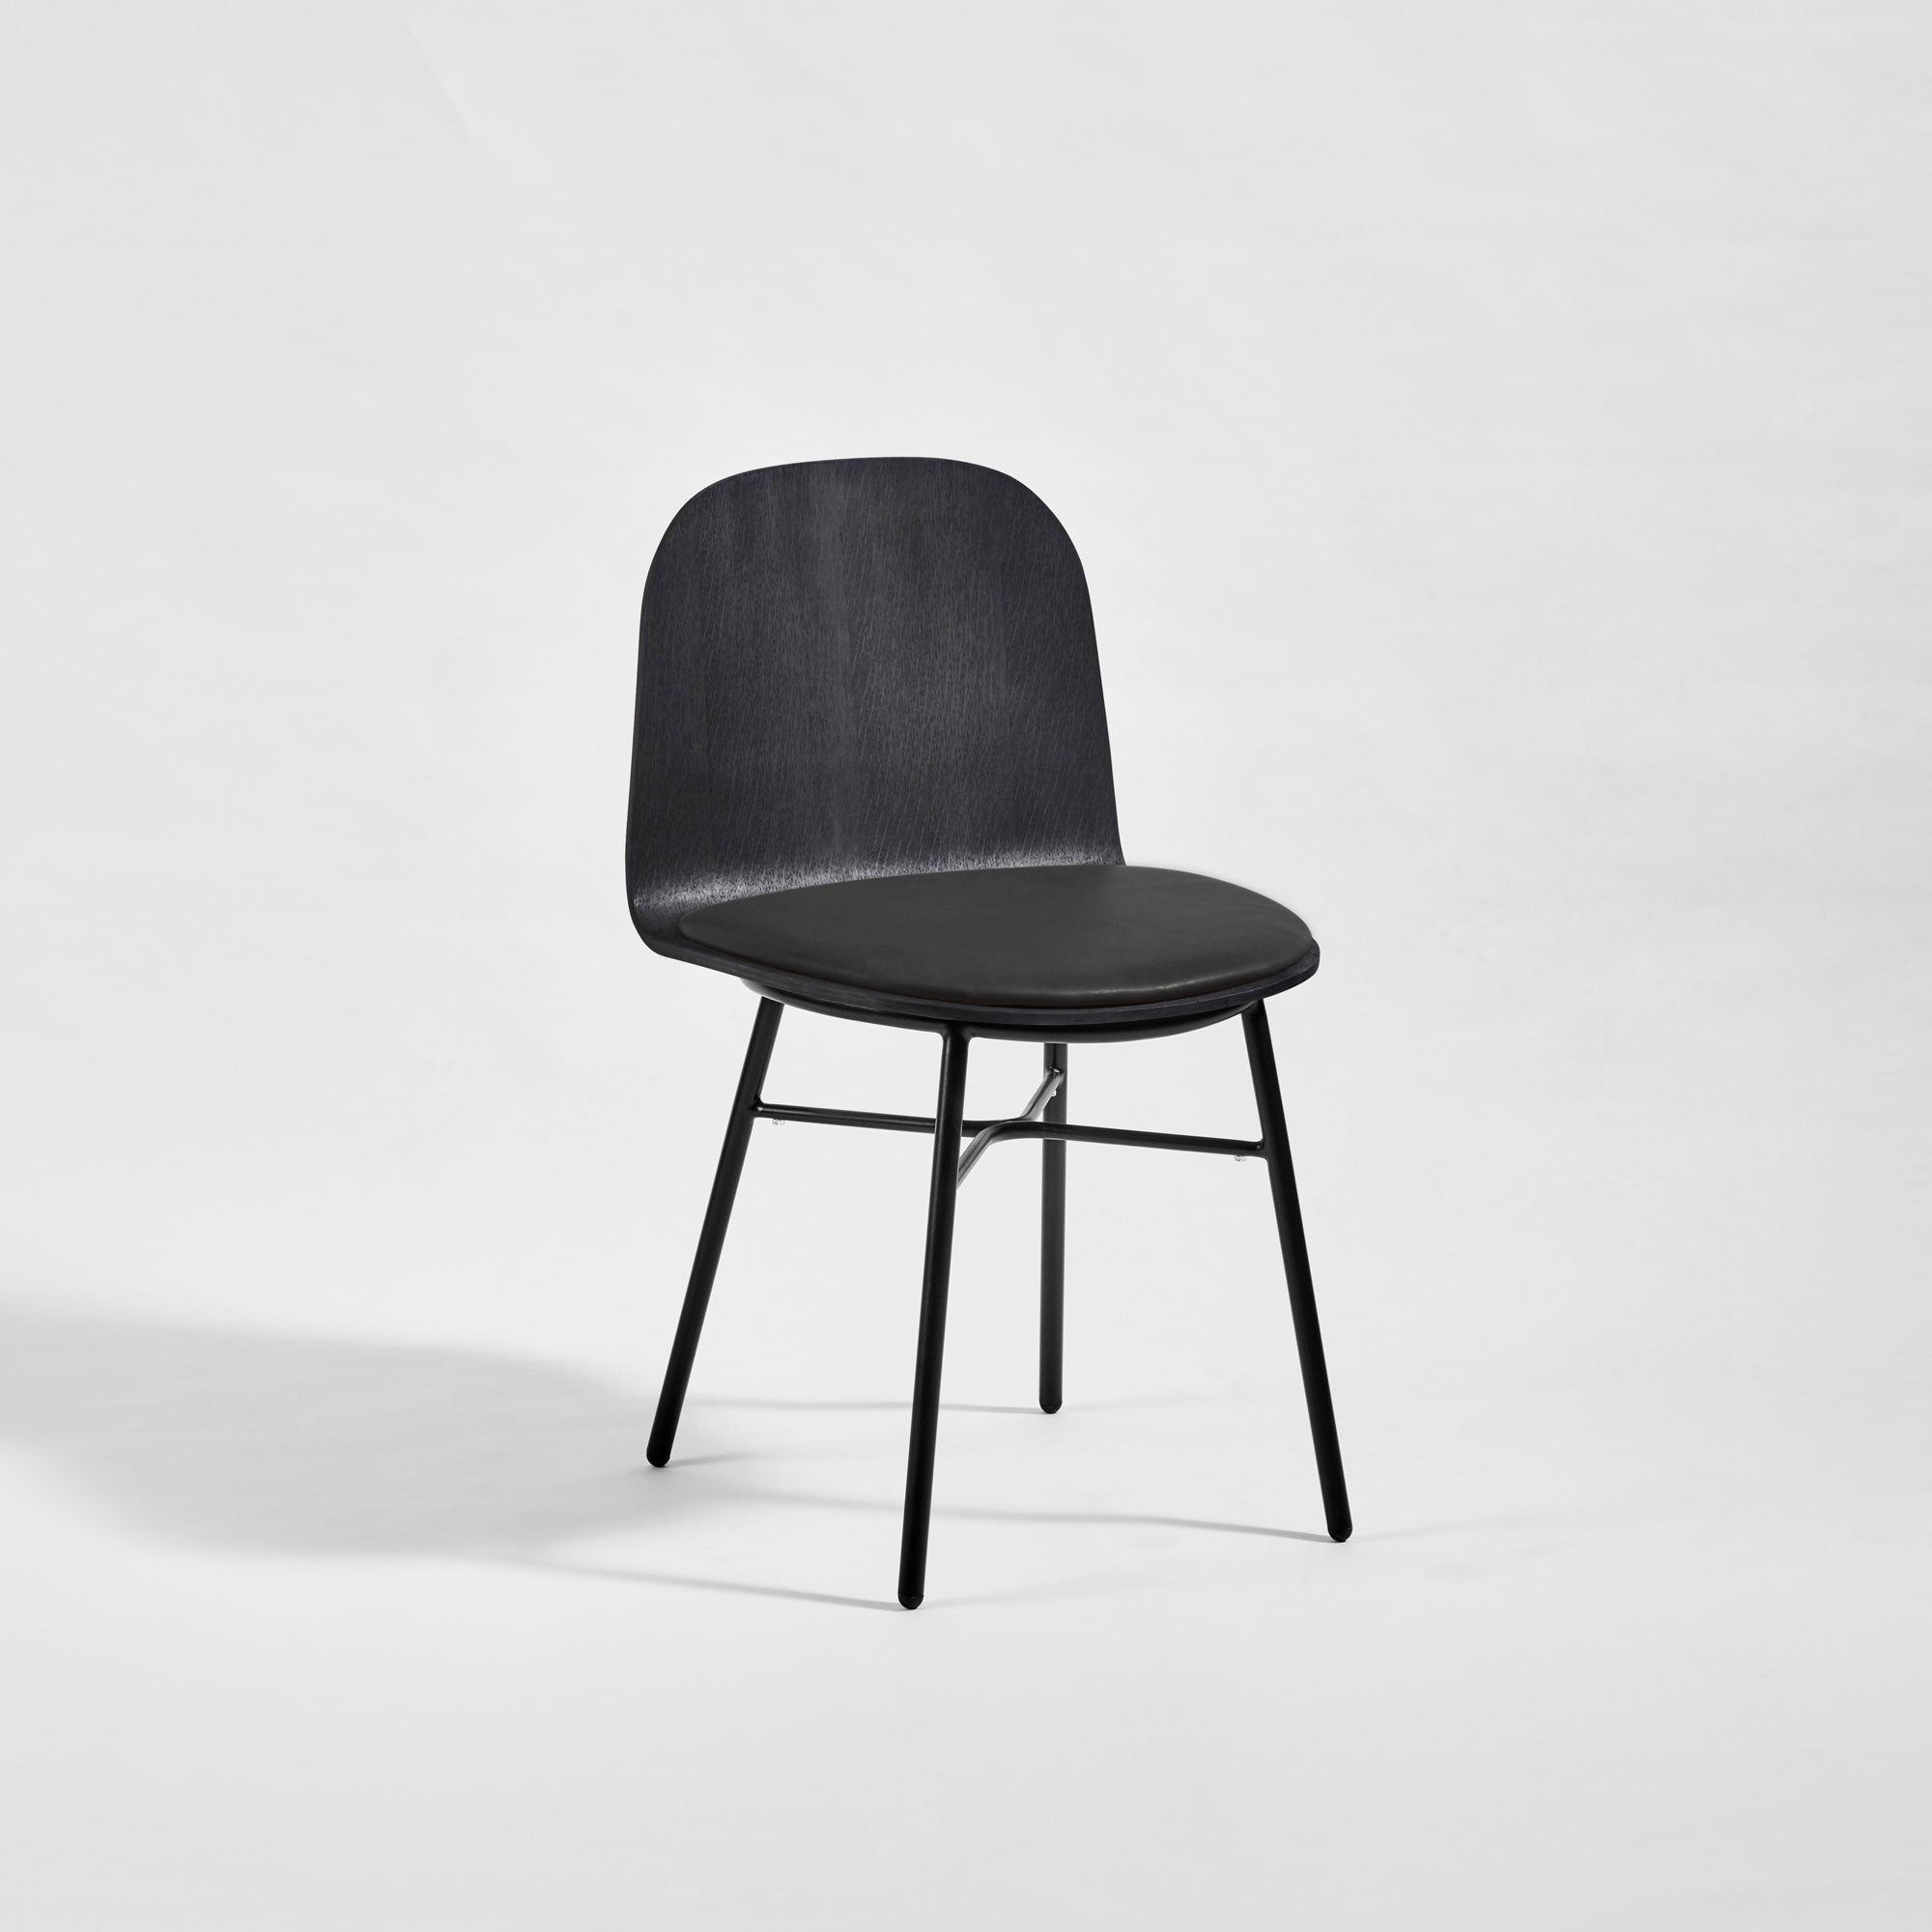 Potato Chair | Timber & Upholstered Dining Office Chair with Handle | GibsonKarlo | DesignByThem ** HL1 Leather Primary - BA90 Black / HF2 Lariat (Vinyl) - 006 Black 